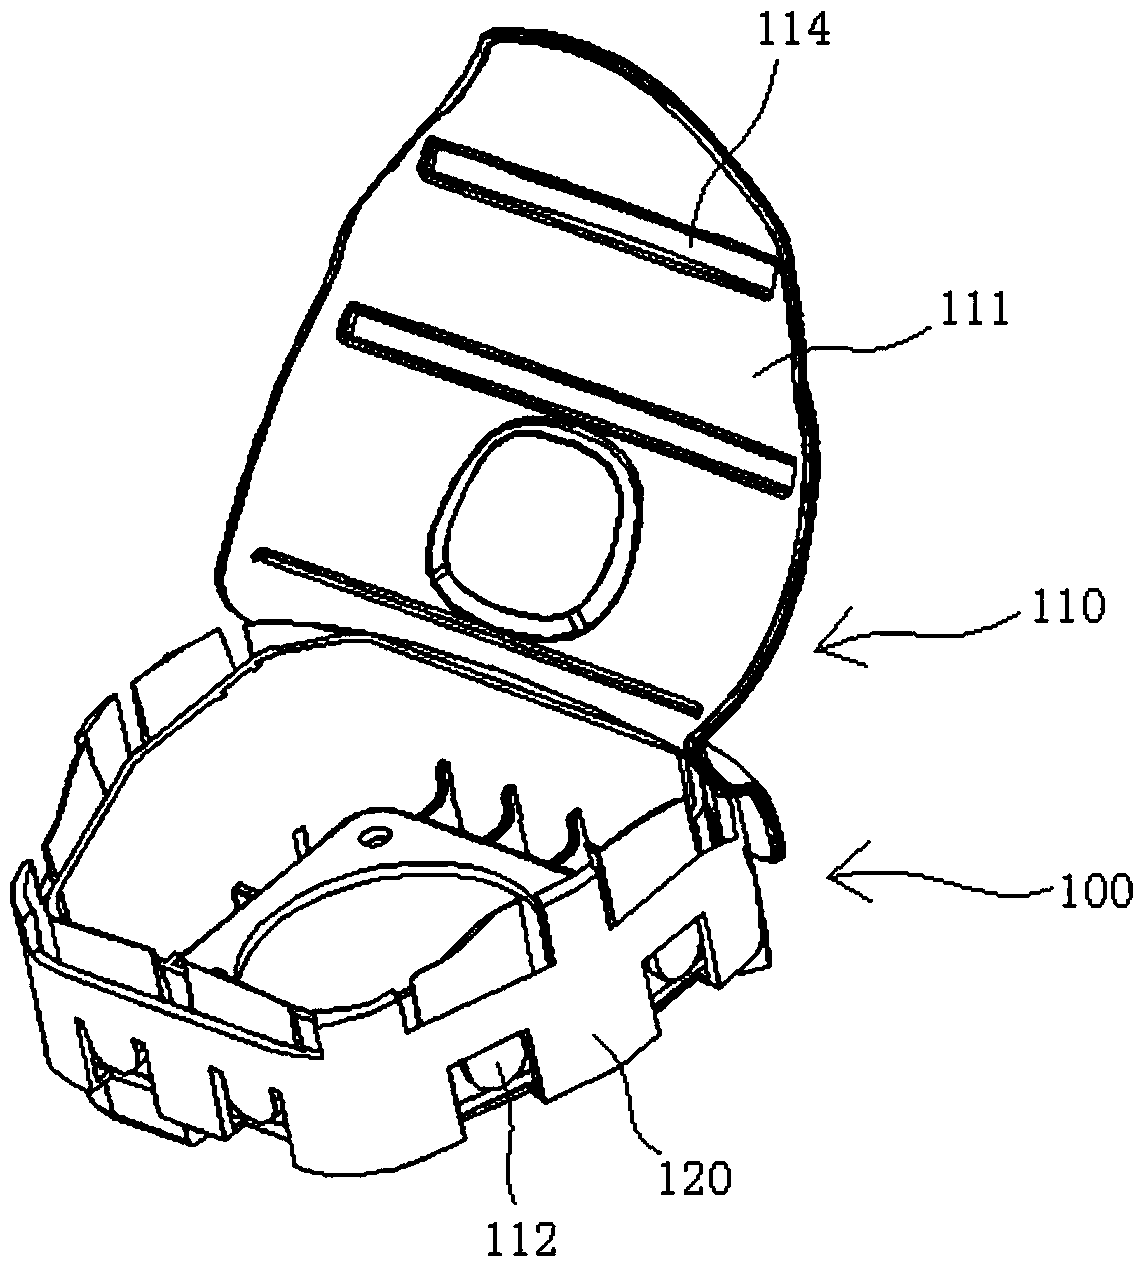 Airbag cover plate and steering wheel airbag device including the cover plate